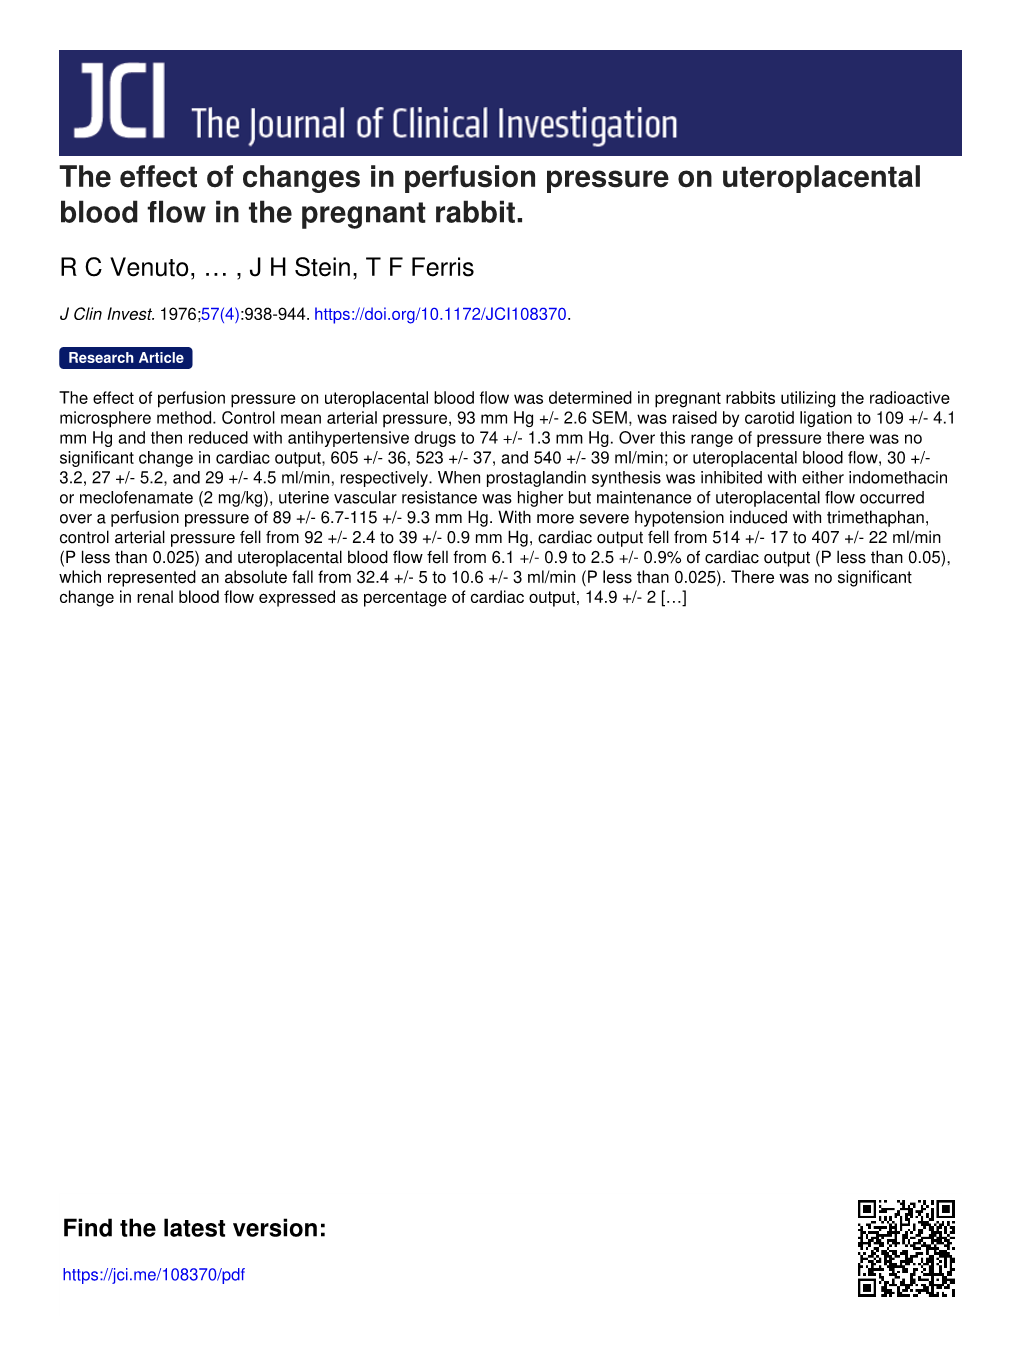 The Effect of Changes in Perfusion Pressure on Uteroplacental Blood Flow in the Pregnant Rabbit